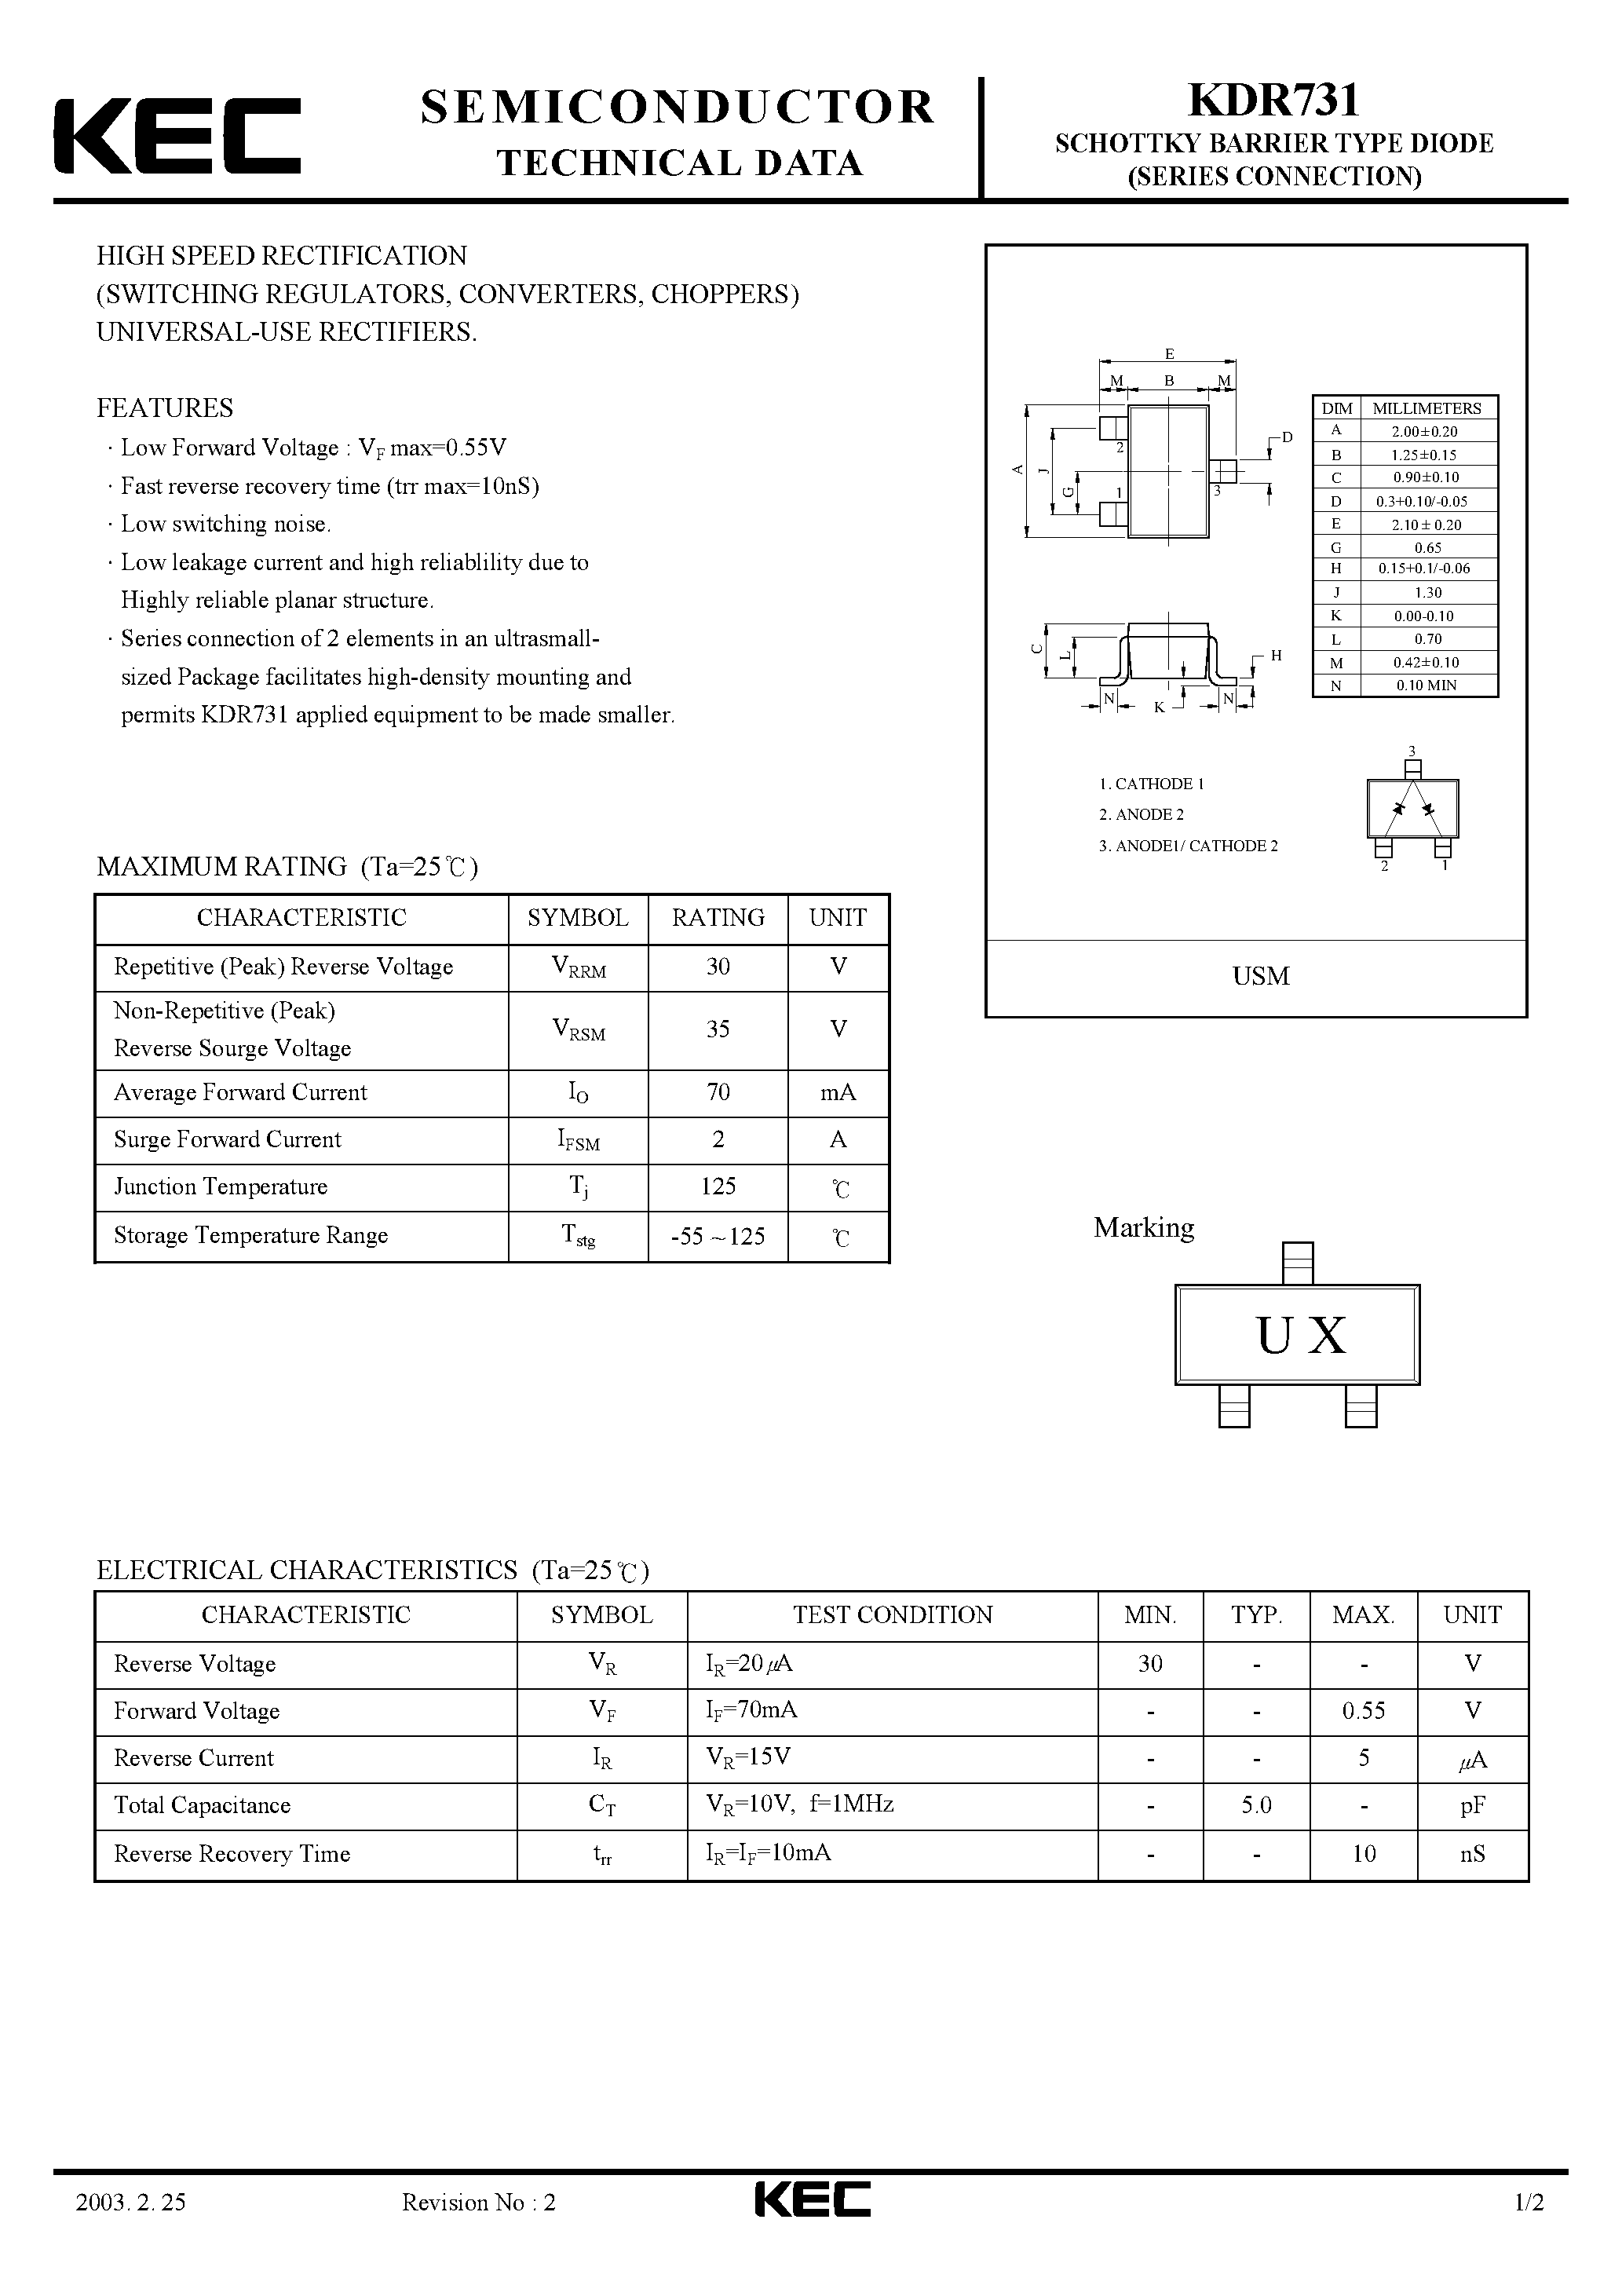 Datasheet KDR731 - SCHOTTKY BARRIER TYPE DIODE (SERIES CONNECTION) page 1